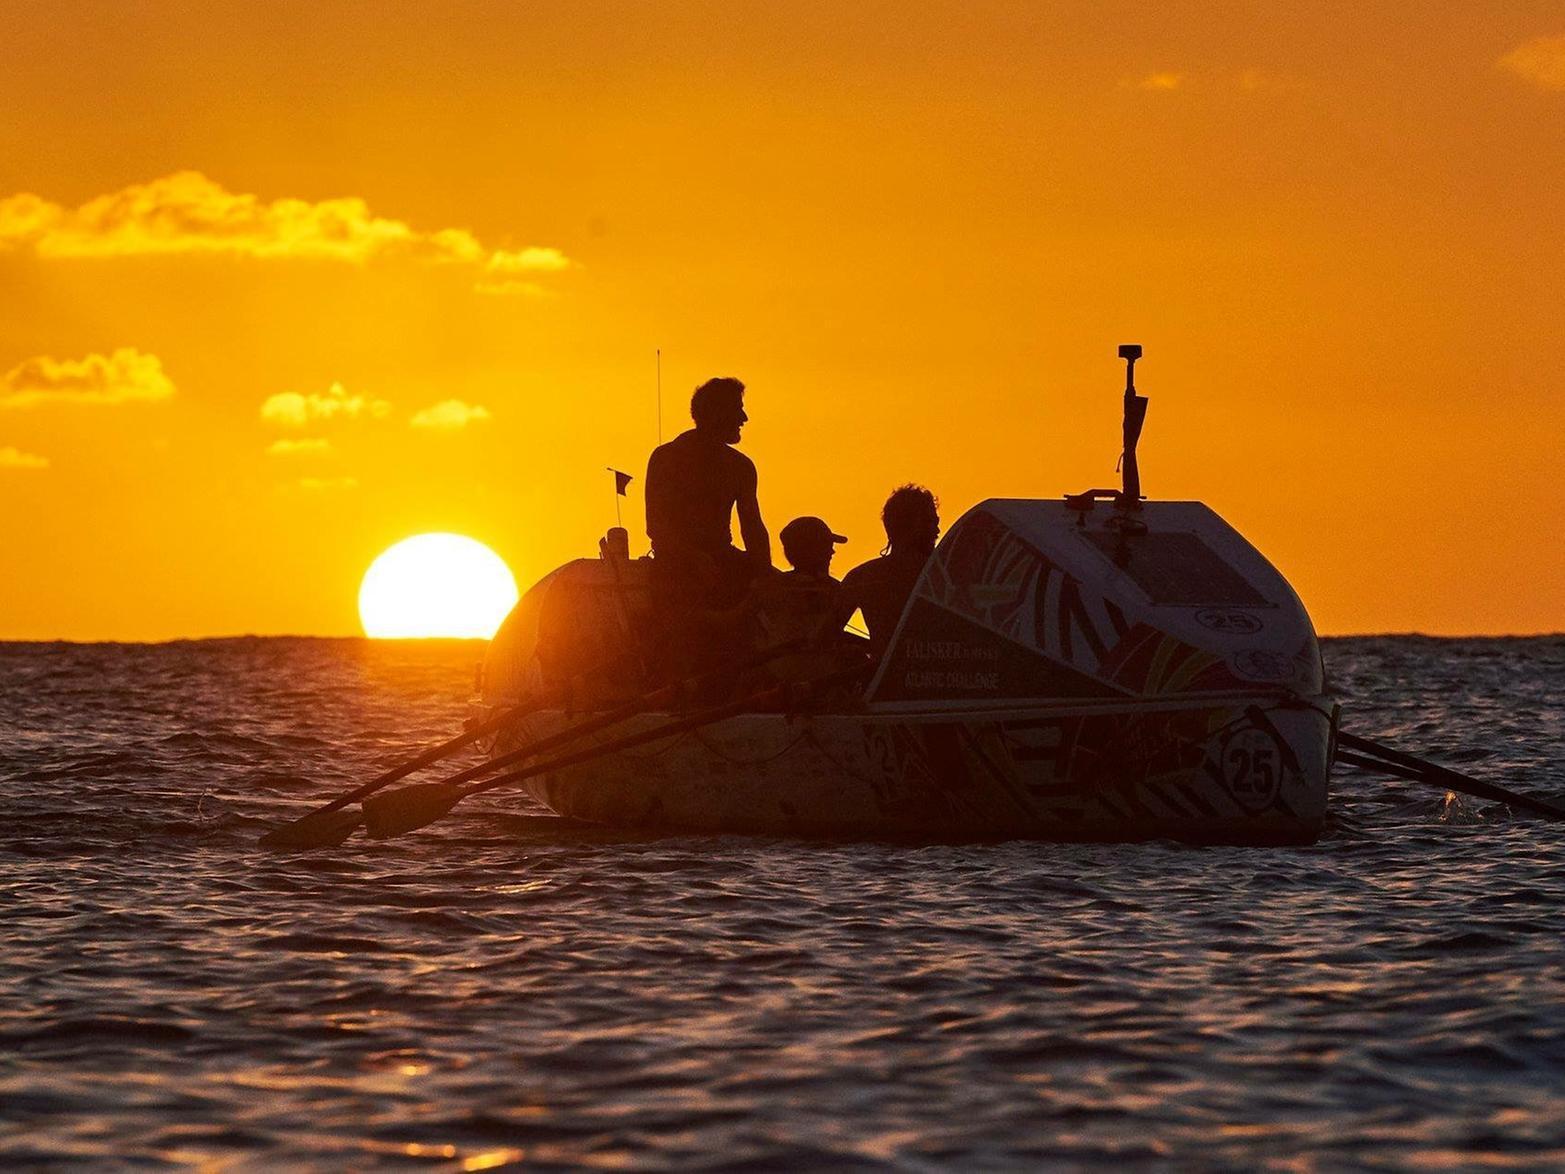 This was the final sunset for a crew crossing the Atlantic Ocean, competing in the Talisker Whisky Challenge, dubbed the worlds toughest row. The crew including retired police officer Stephen Sidaway, from Hatton Park , who was one of four people to break the world record by crossing the finishing line with his mixed crew in eighth in a race between La Gomera in the Canary Islands to Antigua.
In doing so, Steve has raised more than 4,000 for Molly Ollys Wishes, a charity launched by his neighbours Rachel and Tim Ollerenshaw who lost their daughter Molly at age eight, to a rare kidney cancer in 2011.